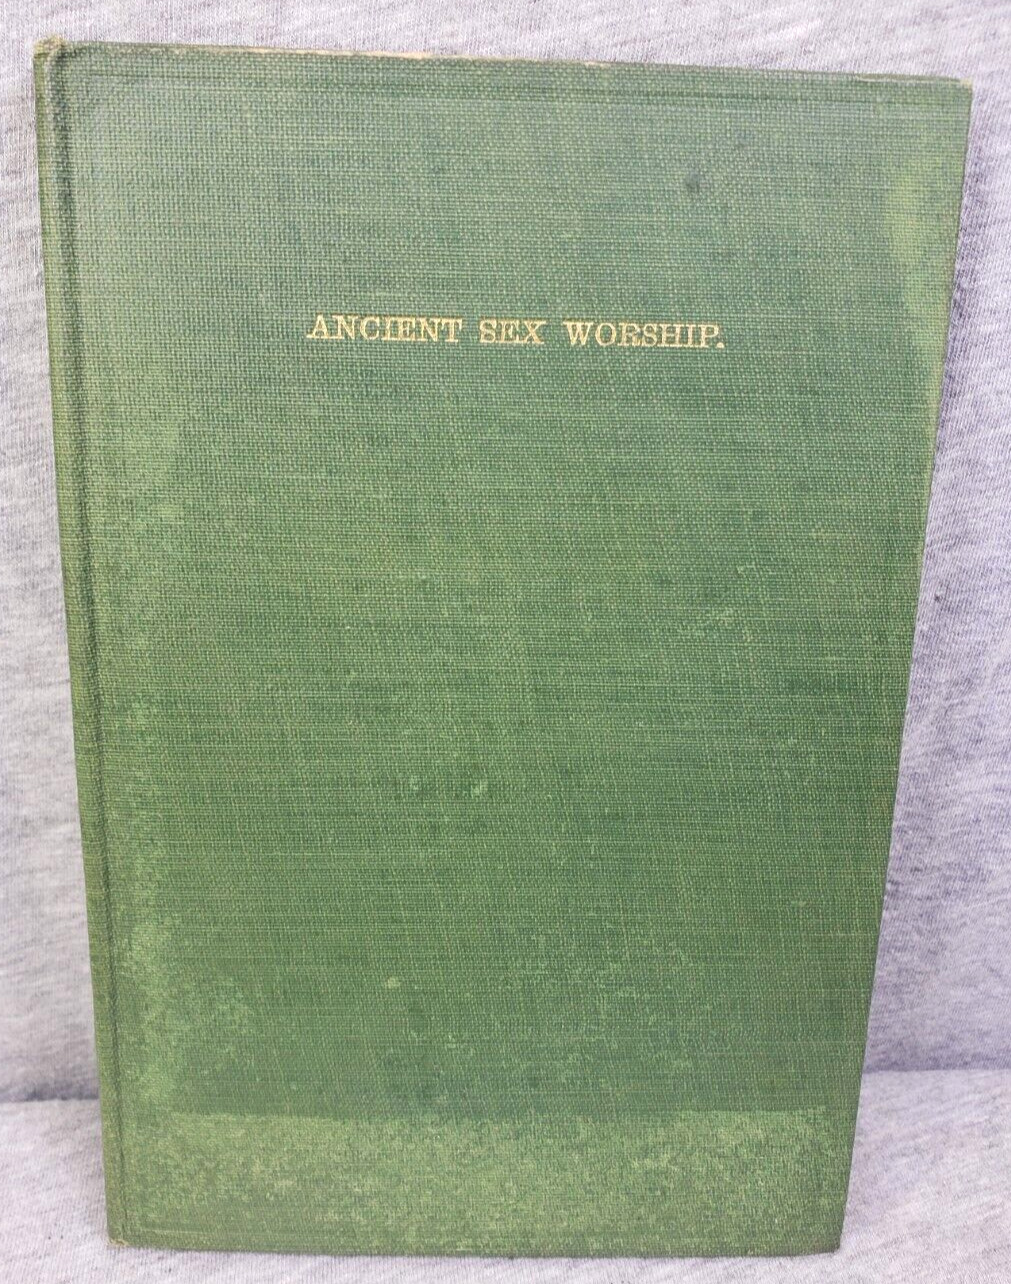 1904 The Masculine Cross and Ancient Sex Worship HB Book Sha Rocco